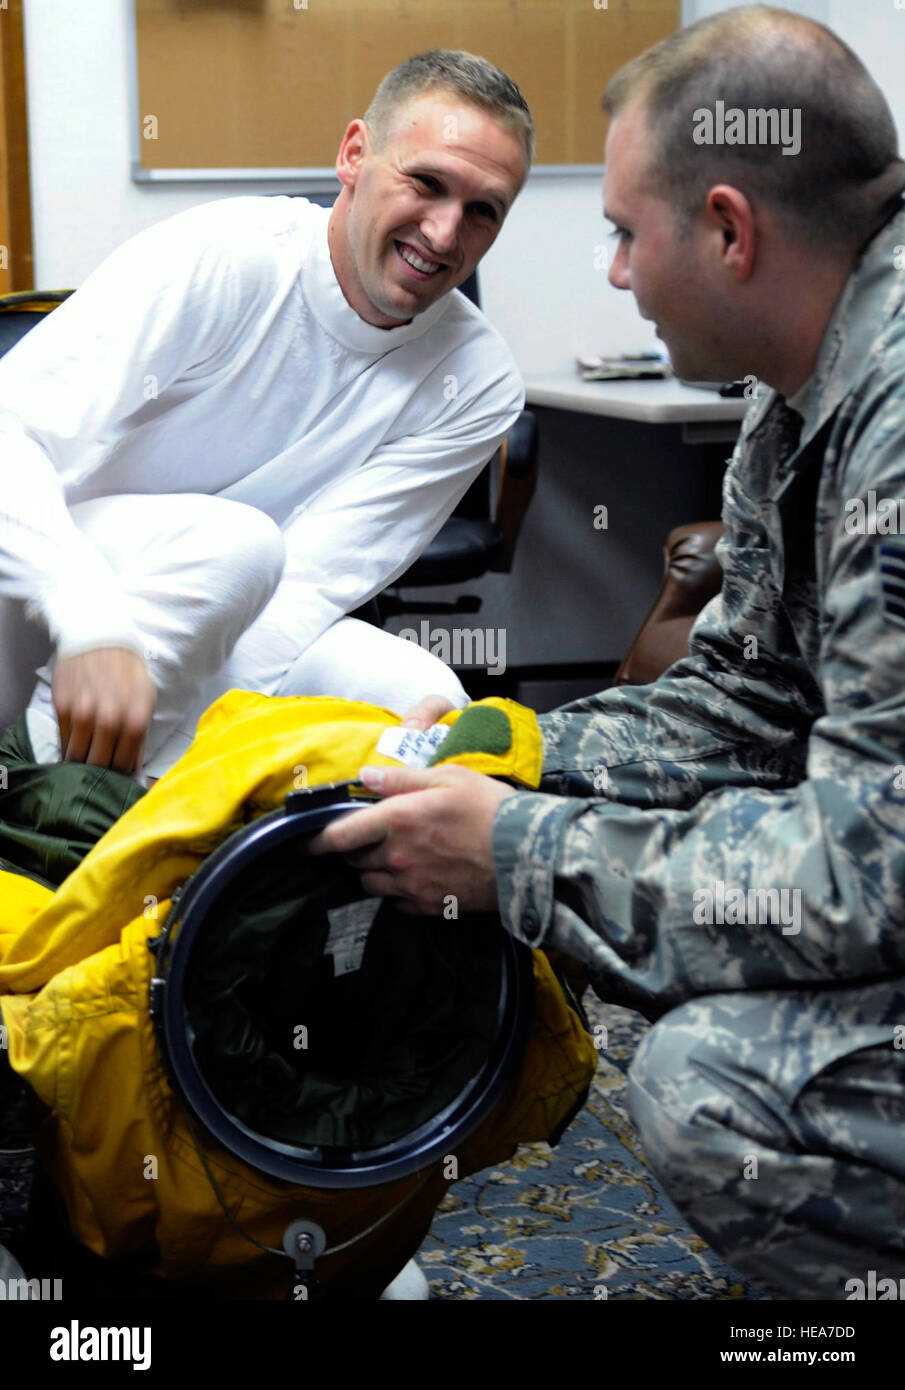 SOUTHWEST ASIA – Staff Sgt. Mark Reith helps Capt. Peter J. Gryn don his specialized suit before a flight Oct. 4, 2009. The sortie was Captain Gryn’s first combat mission. Both Airmen are deployed from Beale Air Force Base, Calif. (Air Force photo/Staff Sgt. J.G. Buzanowski) Stock Photo